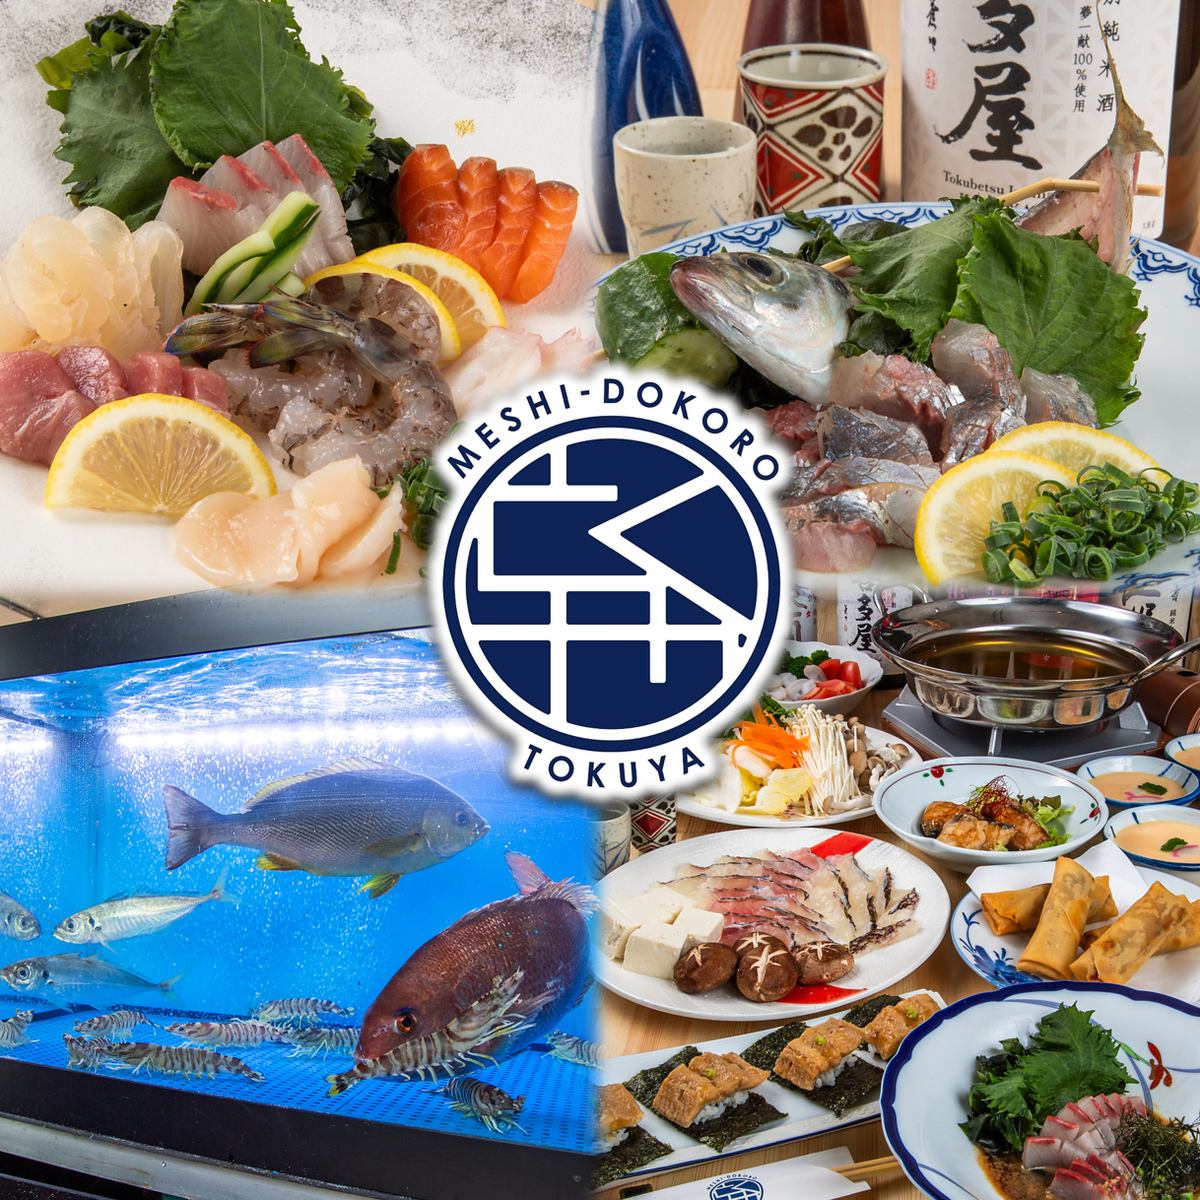 An izakaya where you can enjoy fresh seafood in Futsukaichi ♪ Serving freshly fried seafood from the fish tank ◎